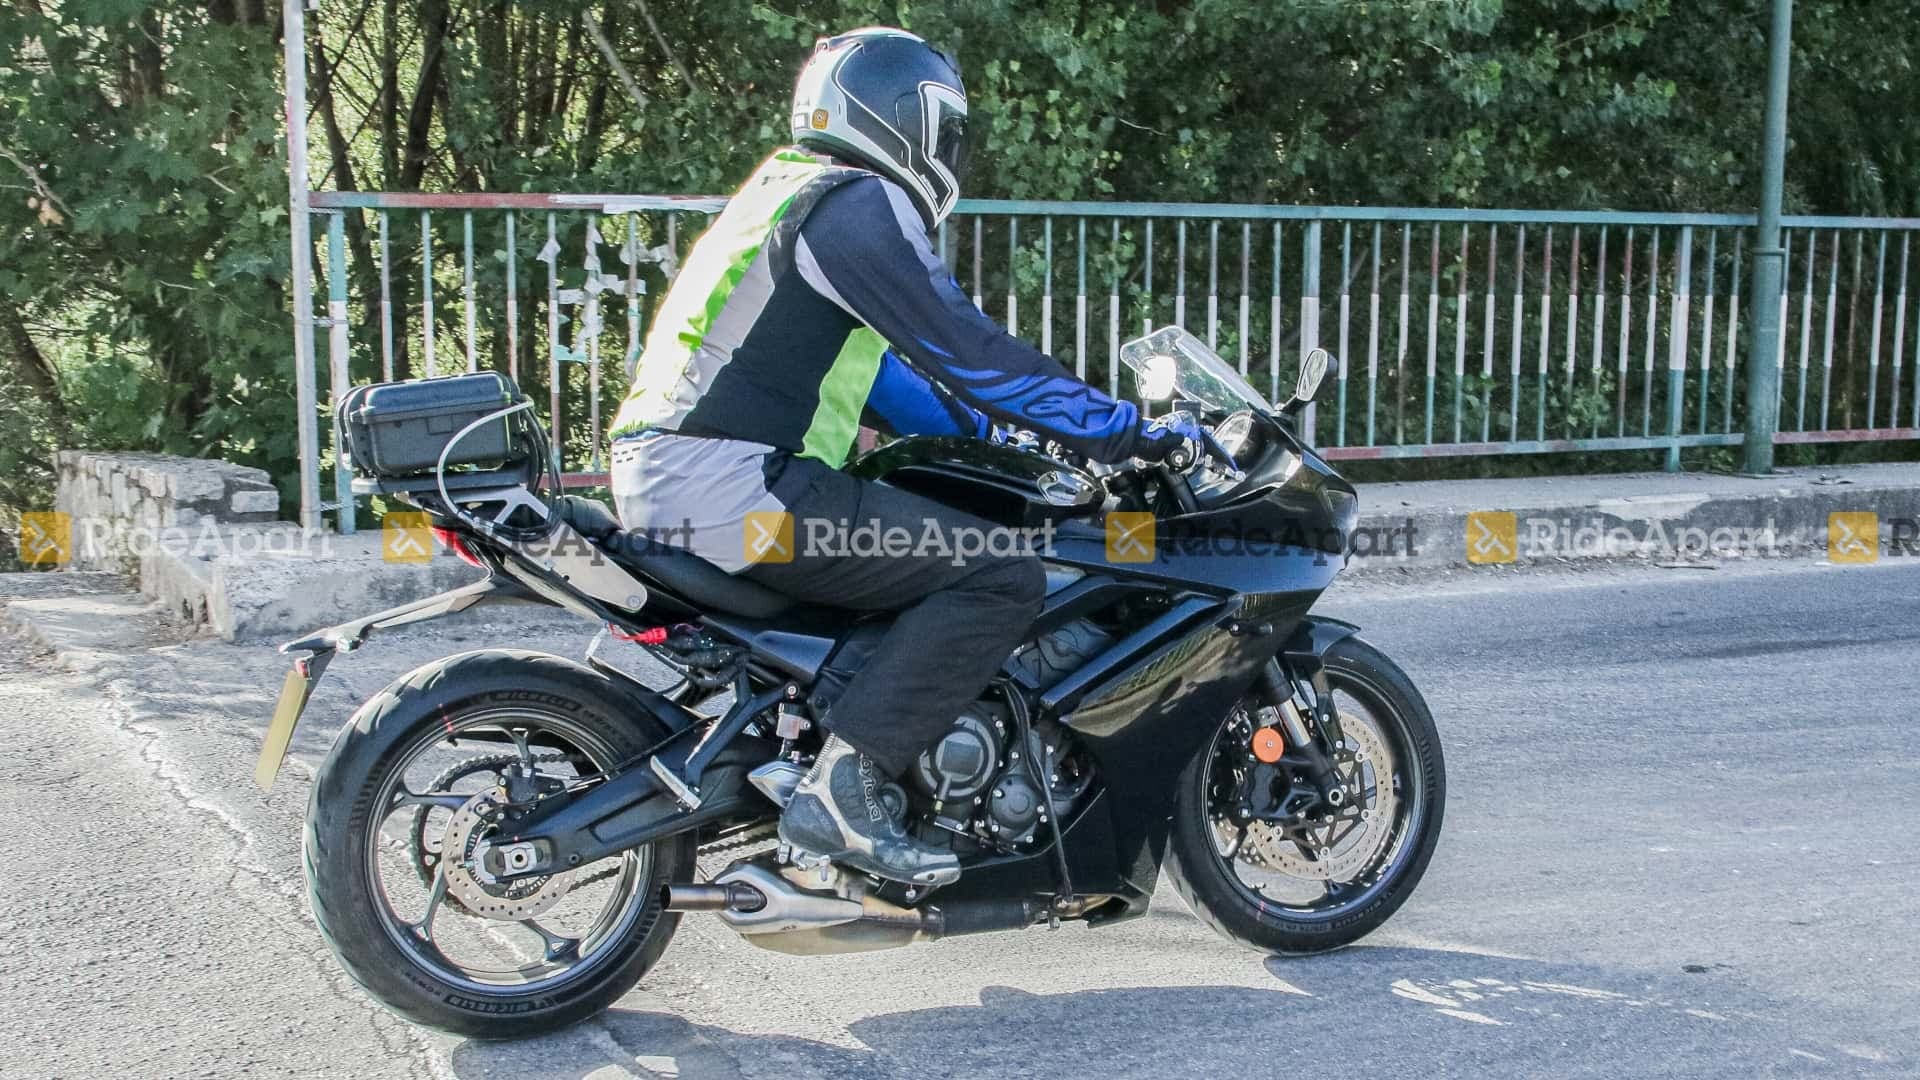 A Test Mule Of The Future Triumph Daytona 660 Caught In Action